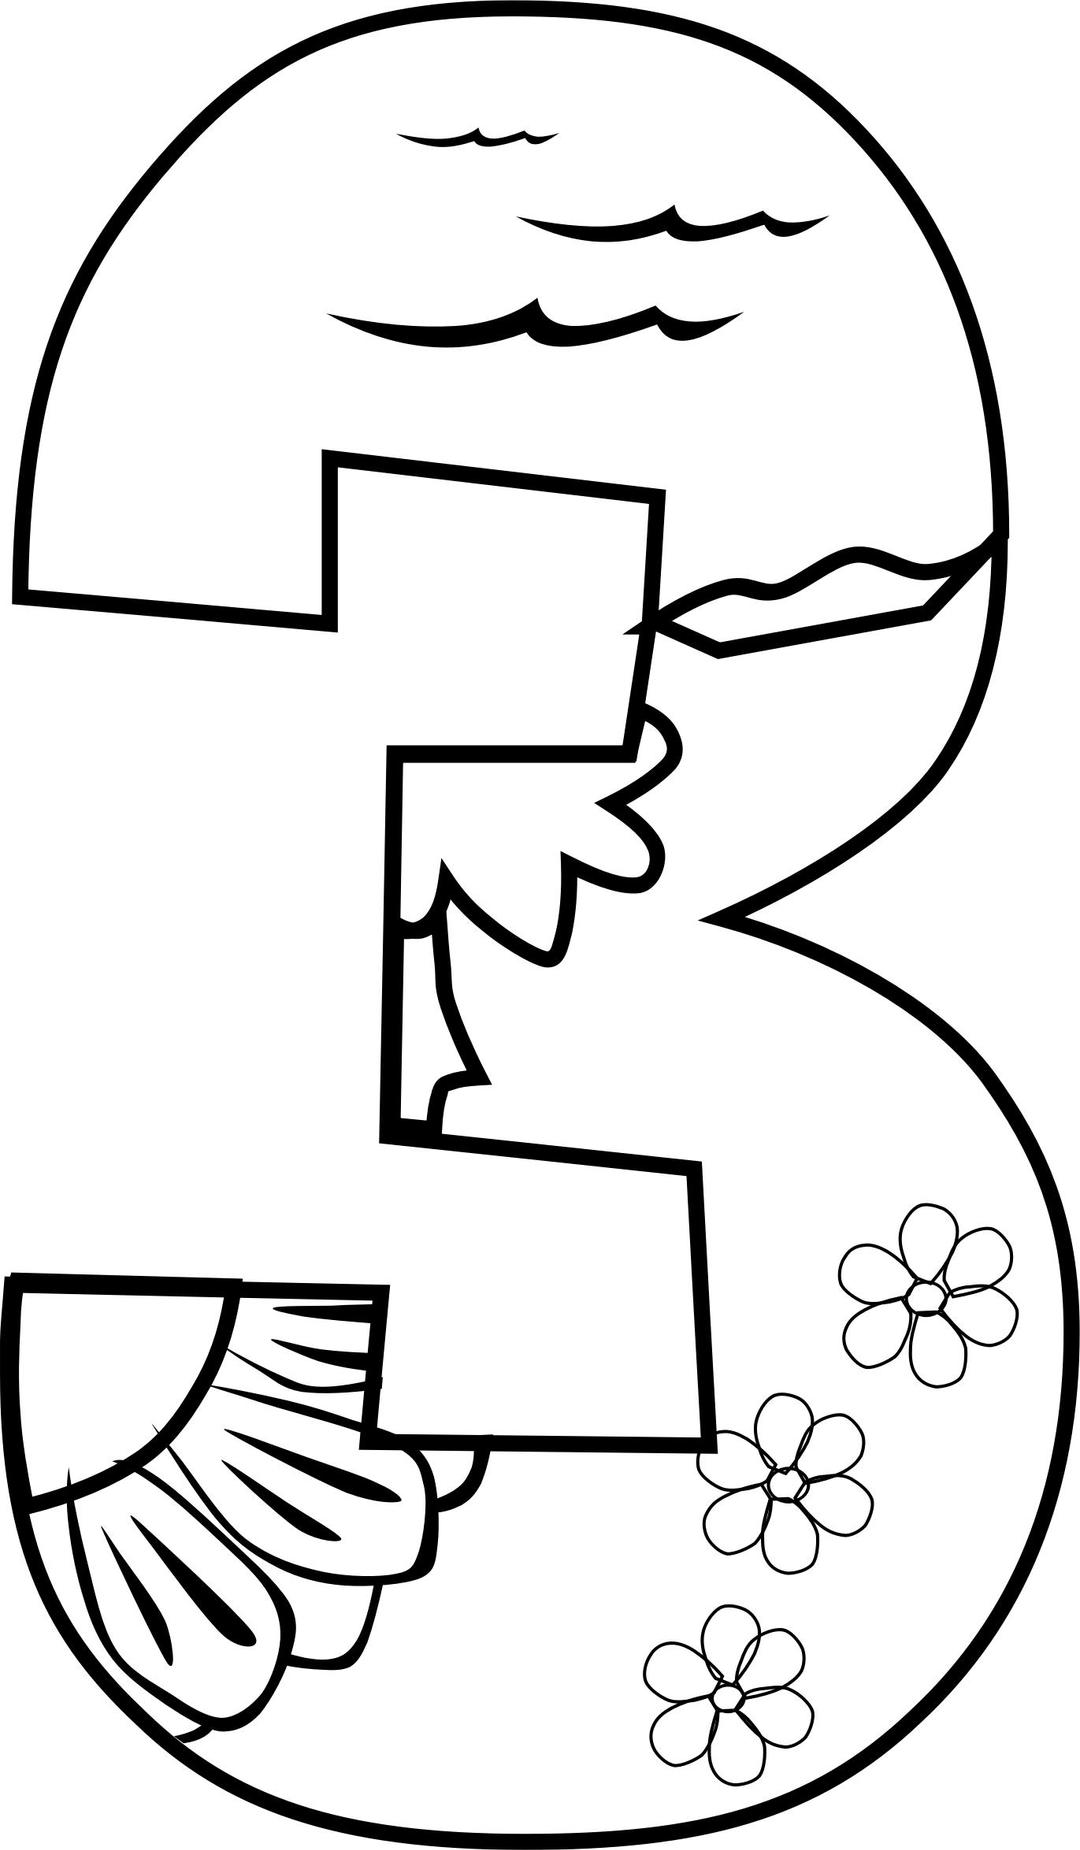 Creation Day 3 Coloring Page png transparent